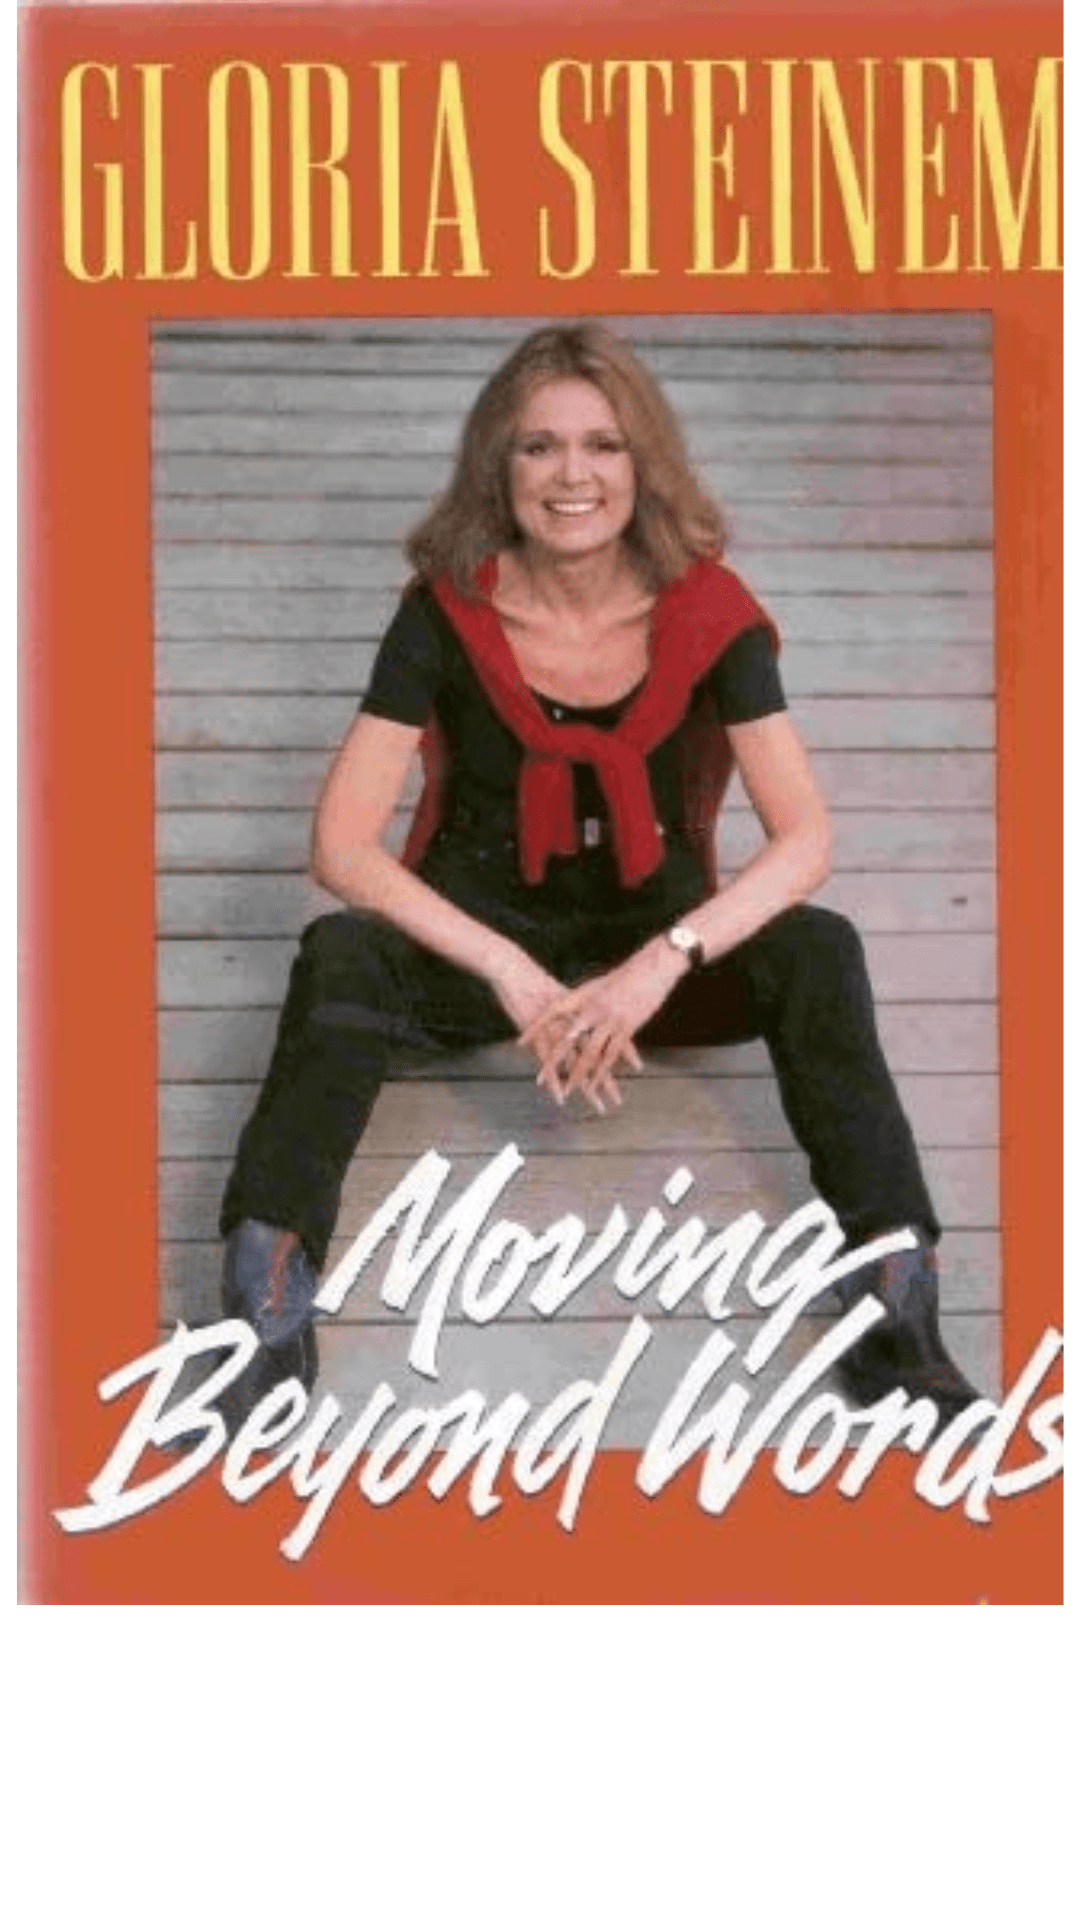 Moving beyond Words